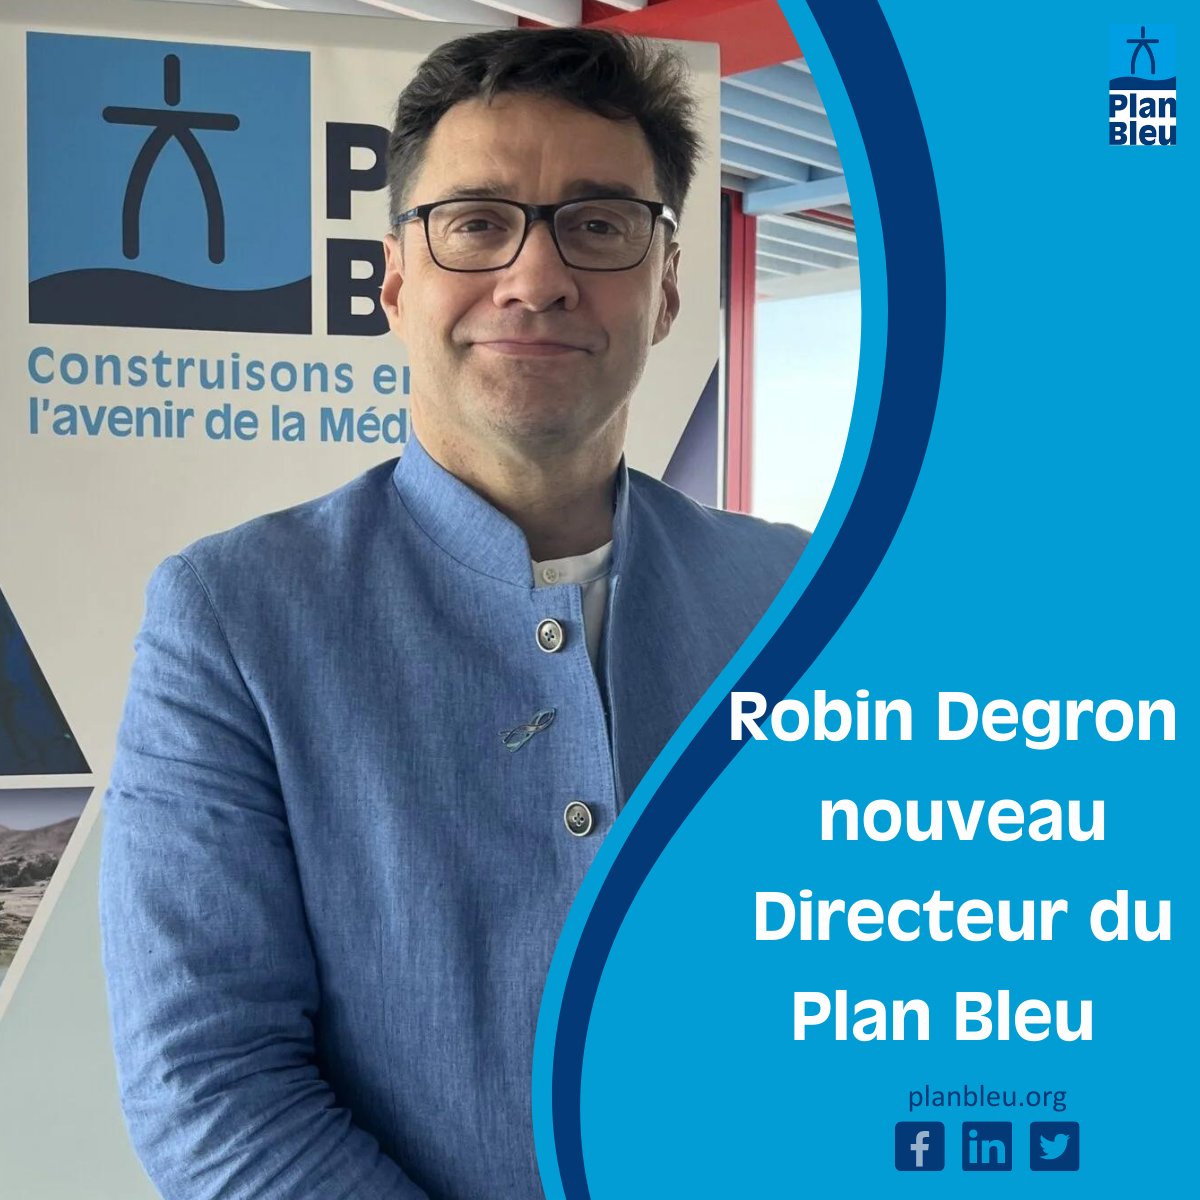 📢 [NOMINATION] Robin Degron is our new Director at Plan Bleu, he replaces François Guerquin since January 1, 2024. Congratulations 👏 🌎 For 30 years, he has worked on governance and financing of sustainable development. 📎 More information: lnkd.in/d4kKGznb